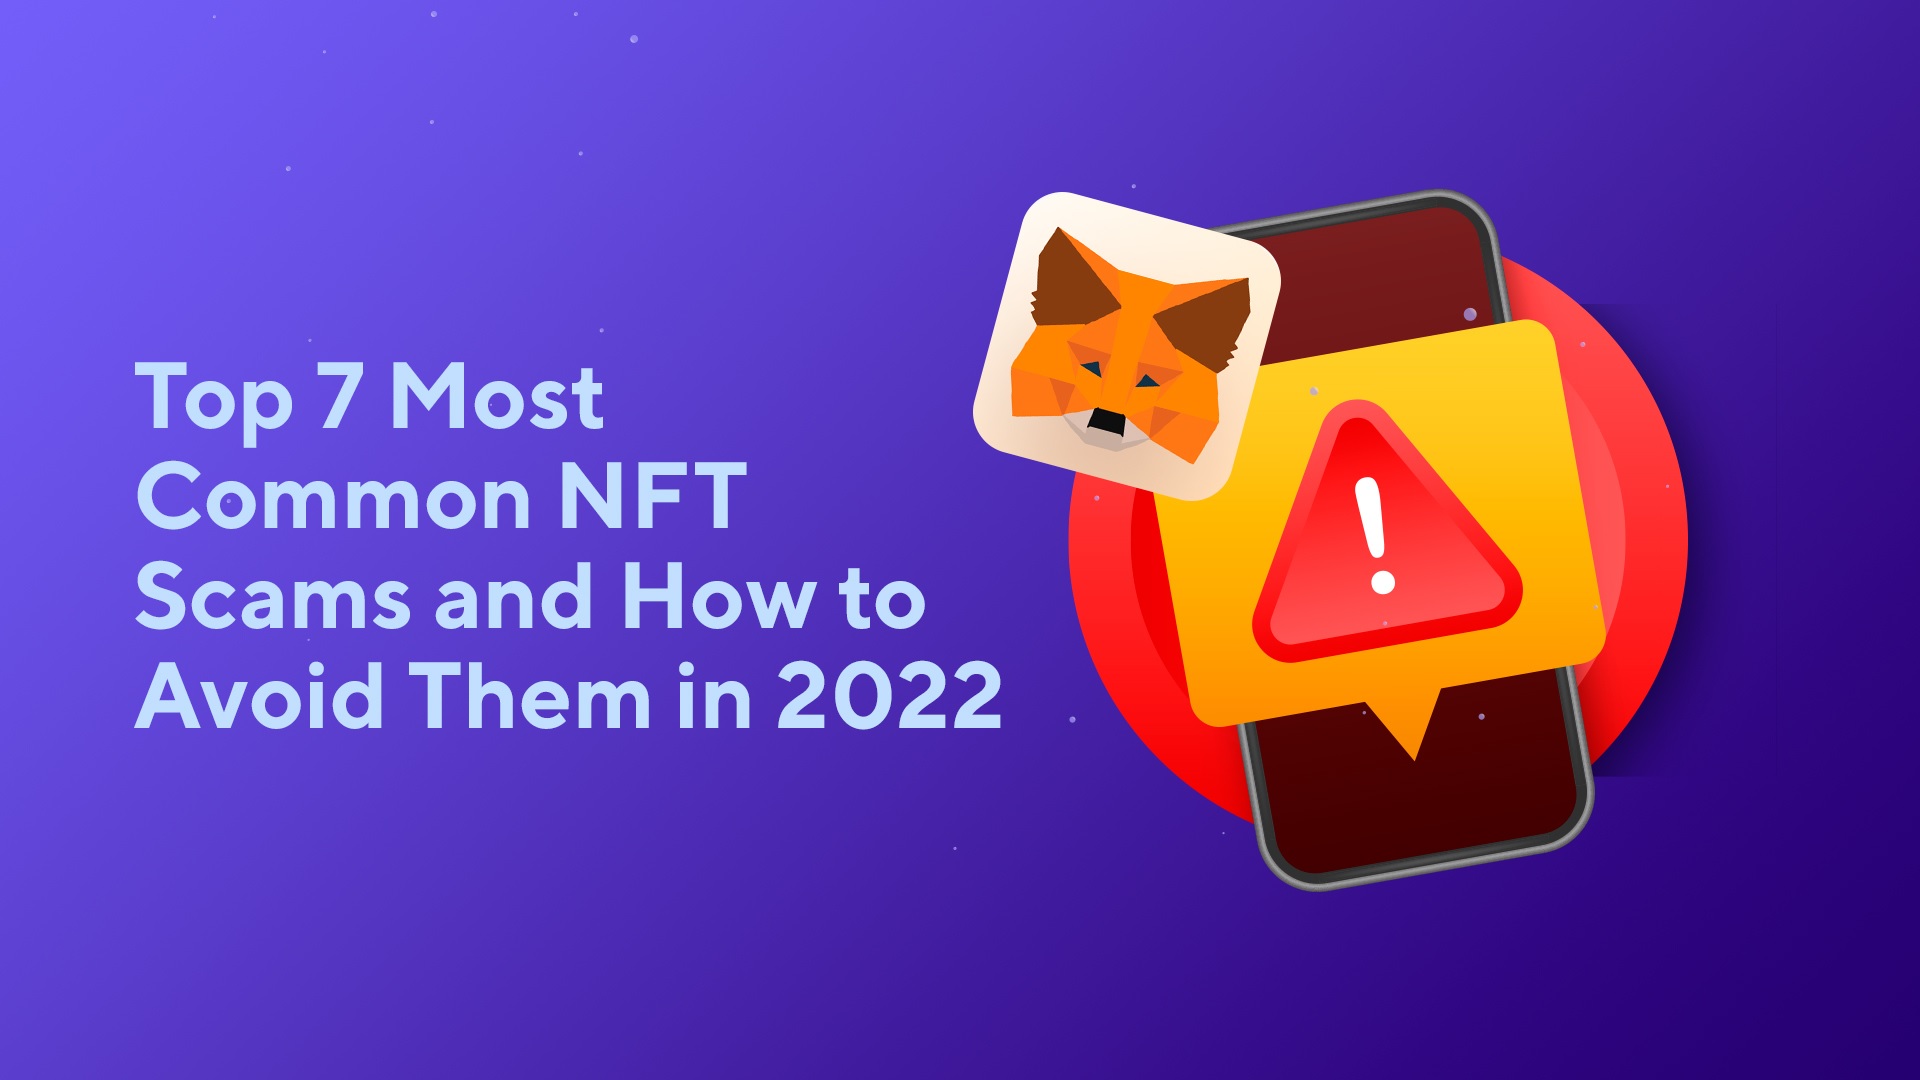 Top 7 Most Common NFT Scams and How to Avoid Them in 2023